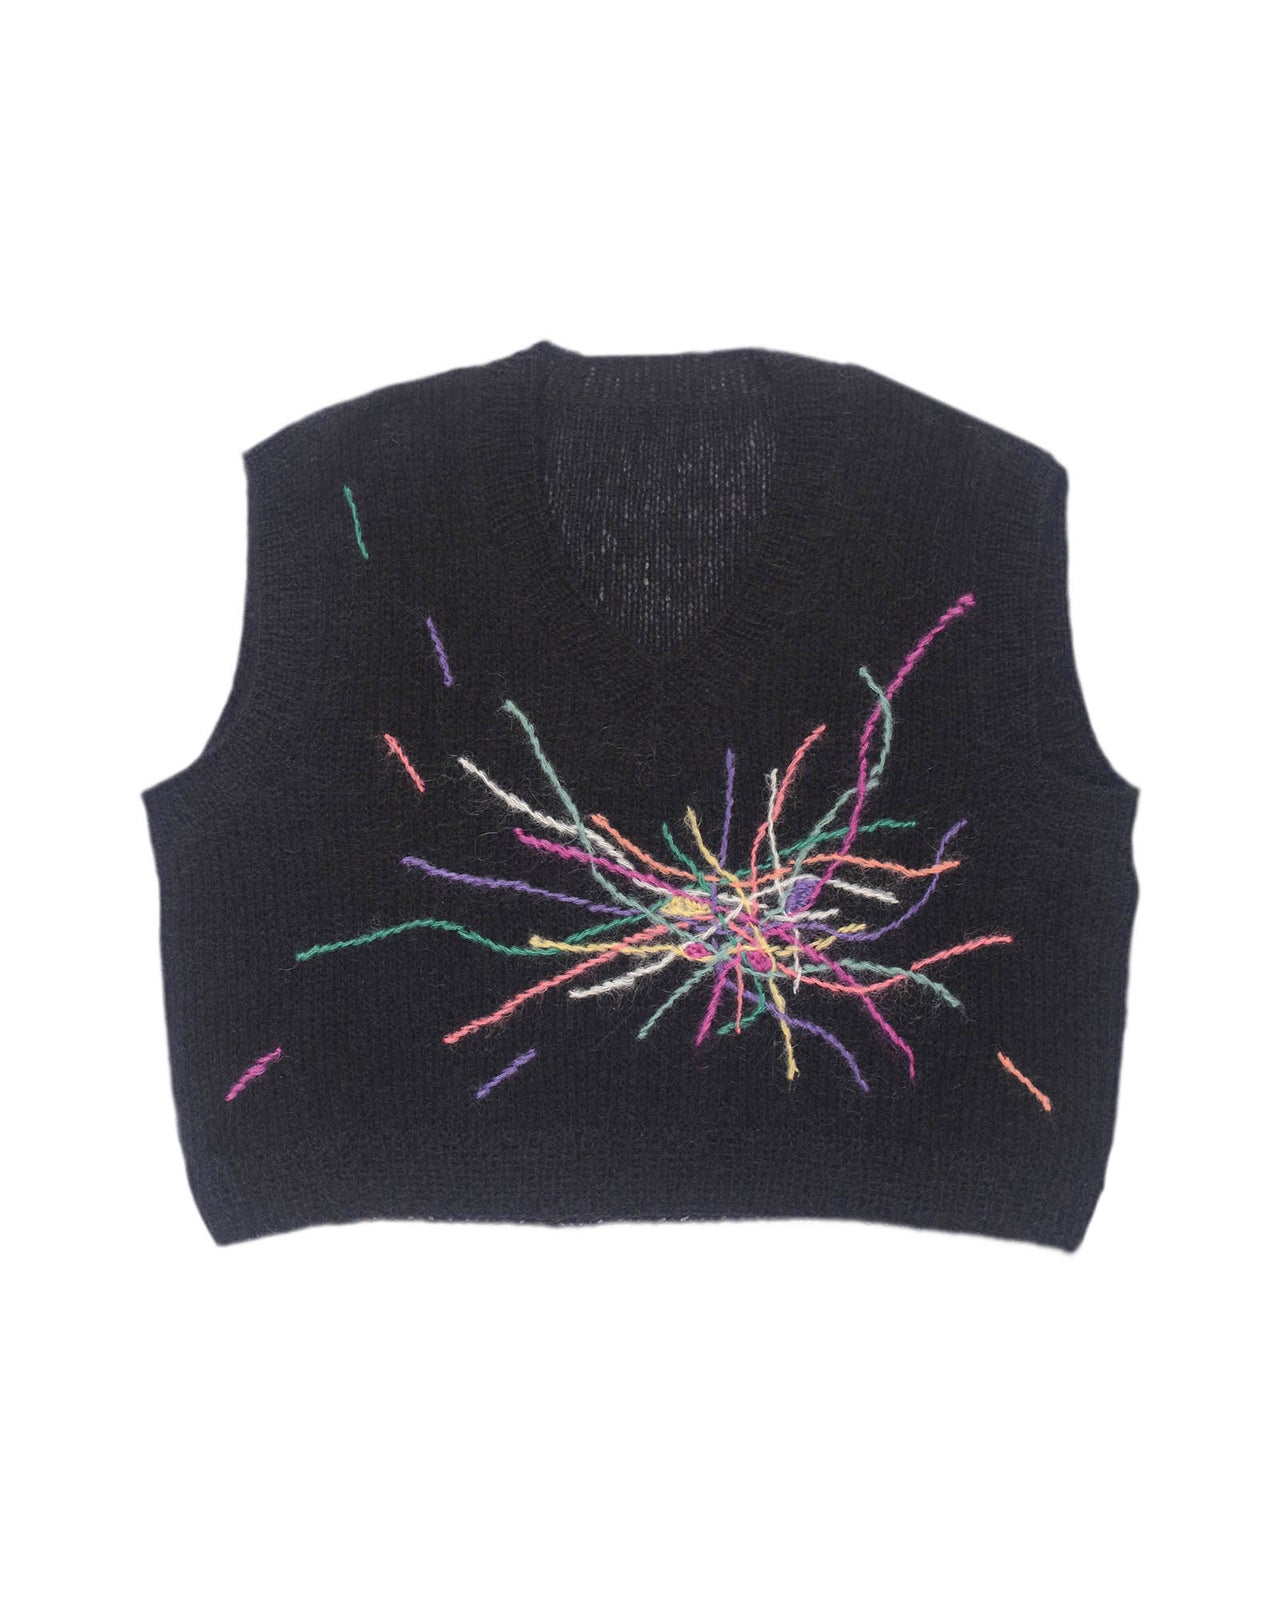 Black mohair vest laid flat on white background. The black vest has colourful embroidered lines going in all directions from the center